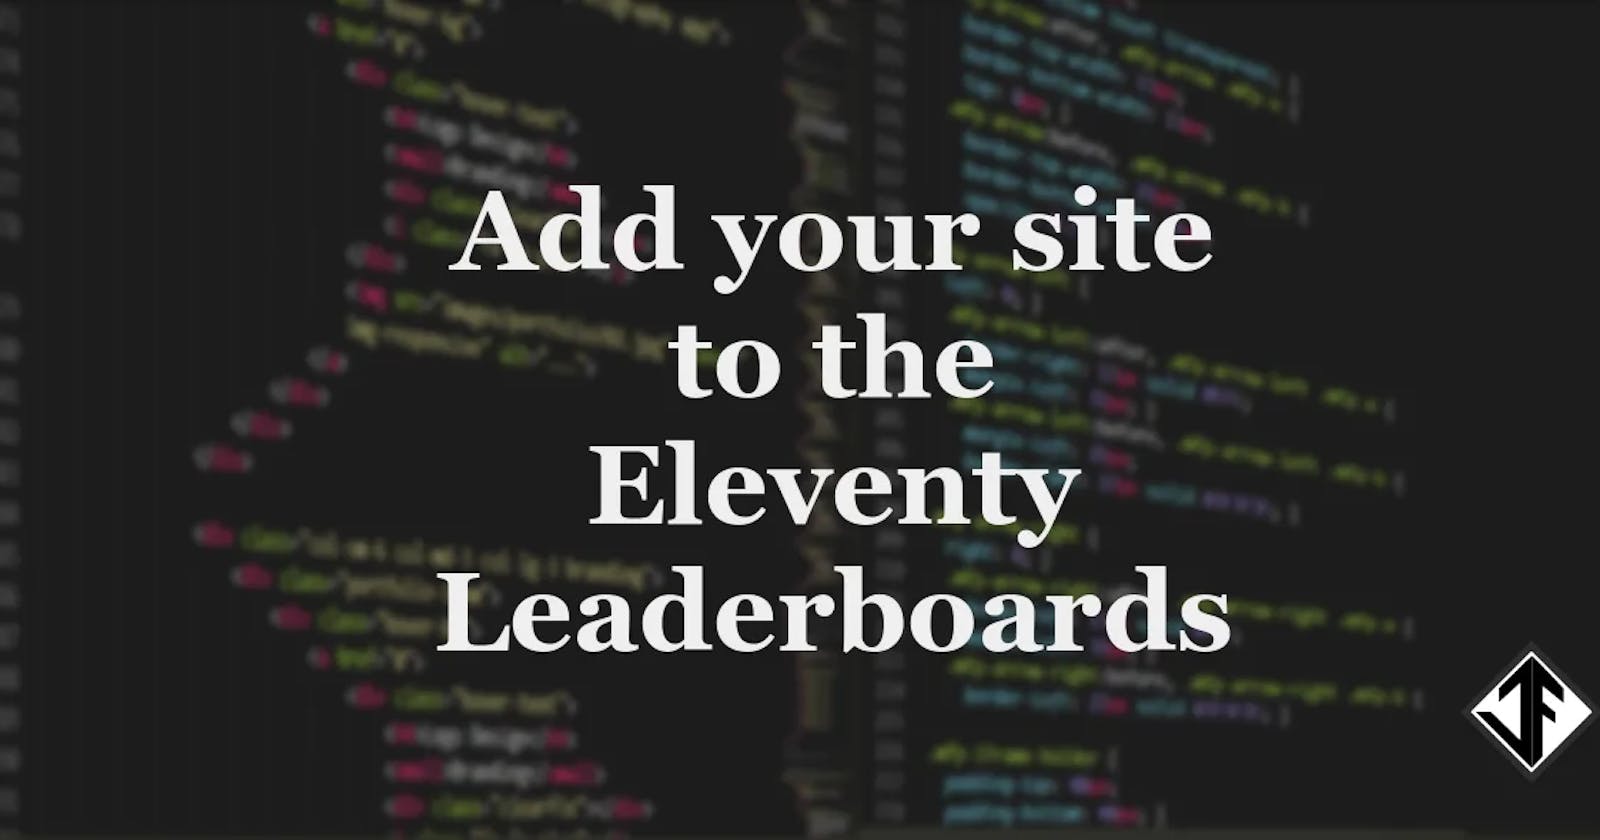 Add your site to the Eleventy Leaderboards